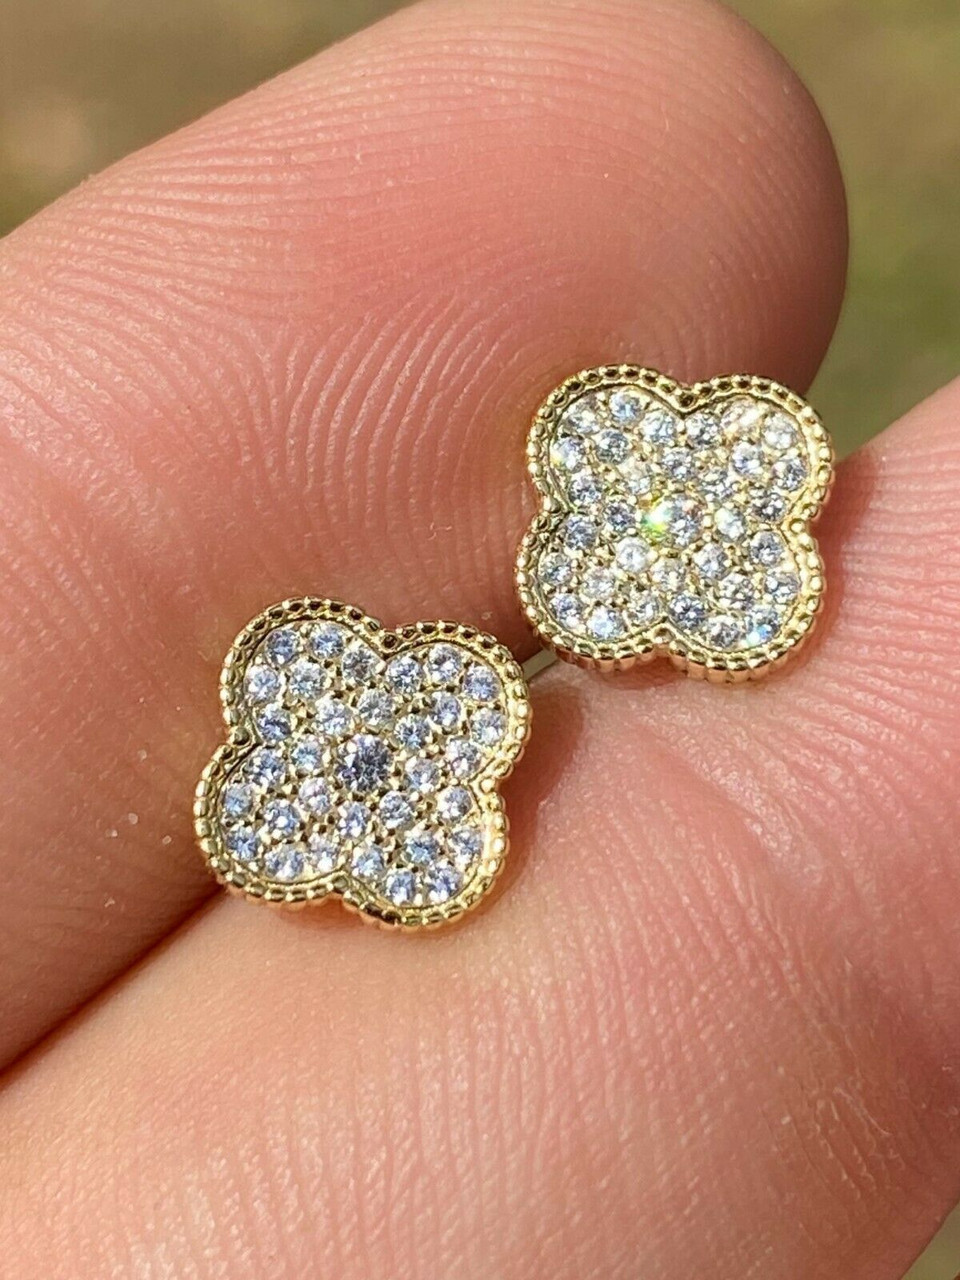 6x4mm Gold Filled Four Leaf Clover Silicone Earring Back